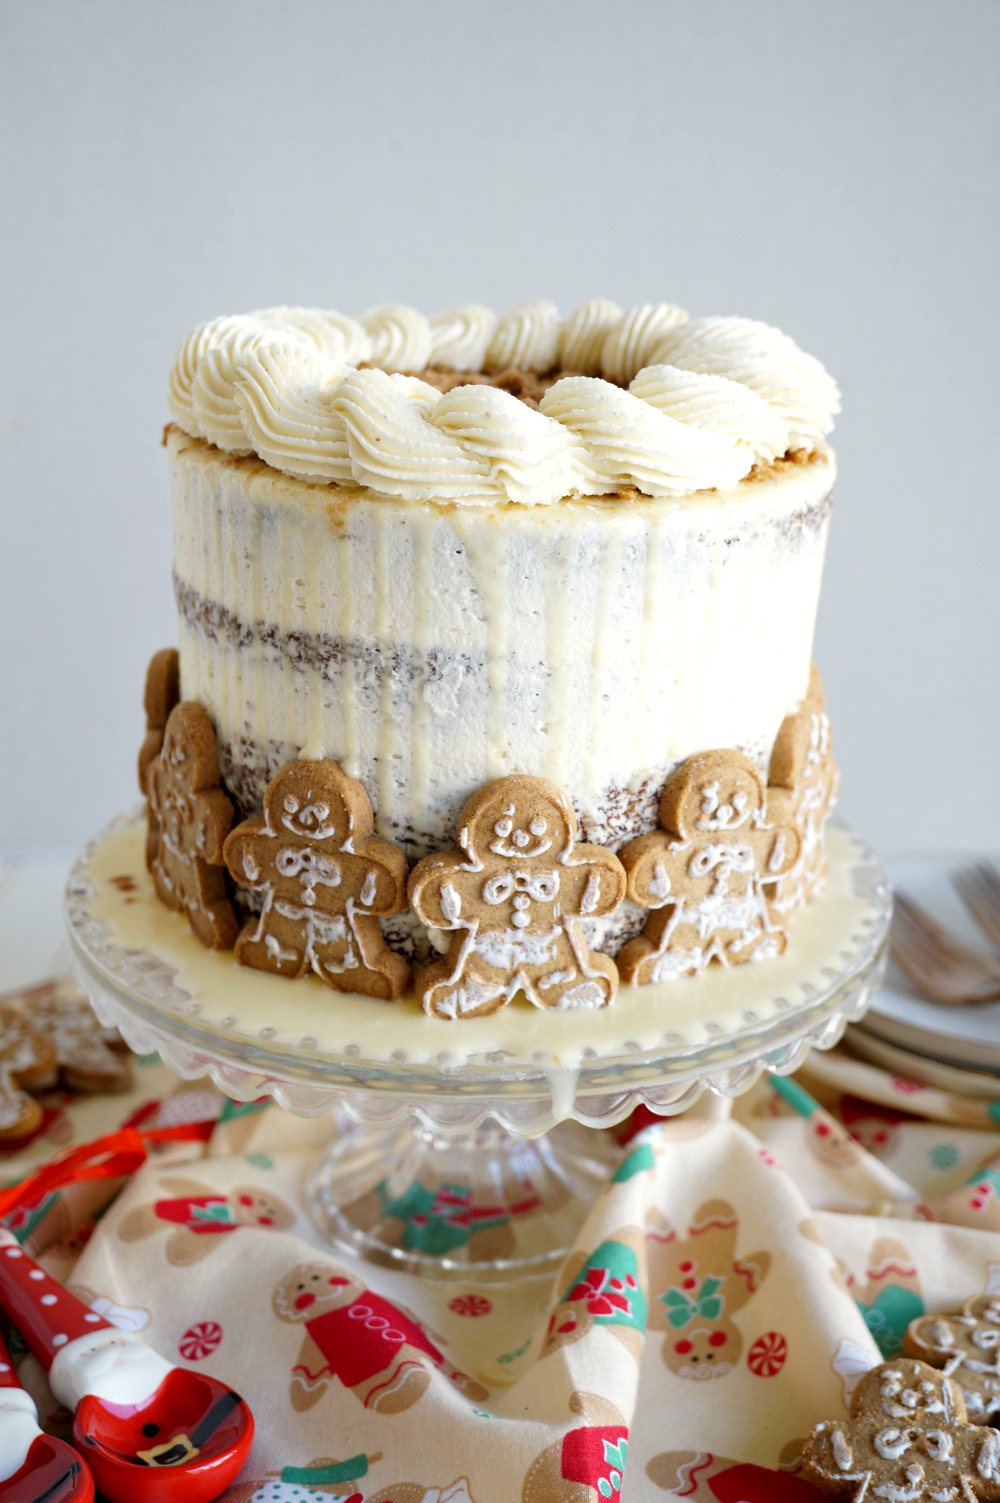 Gingerbread Cake - with Cream Cheese Frosting - Just so Tasty